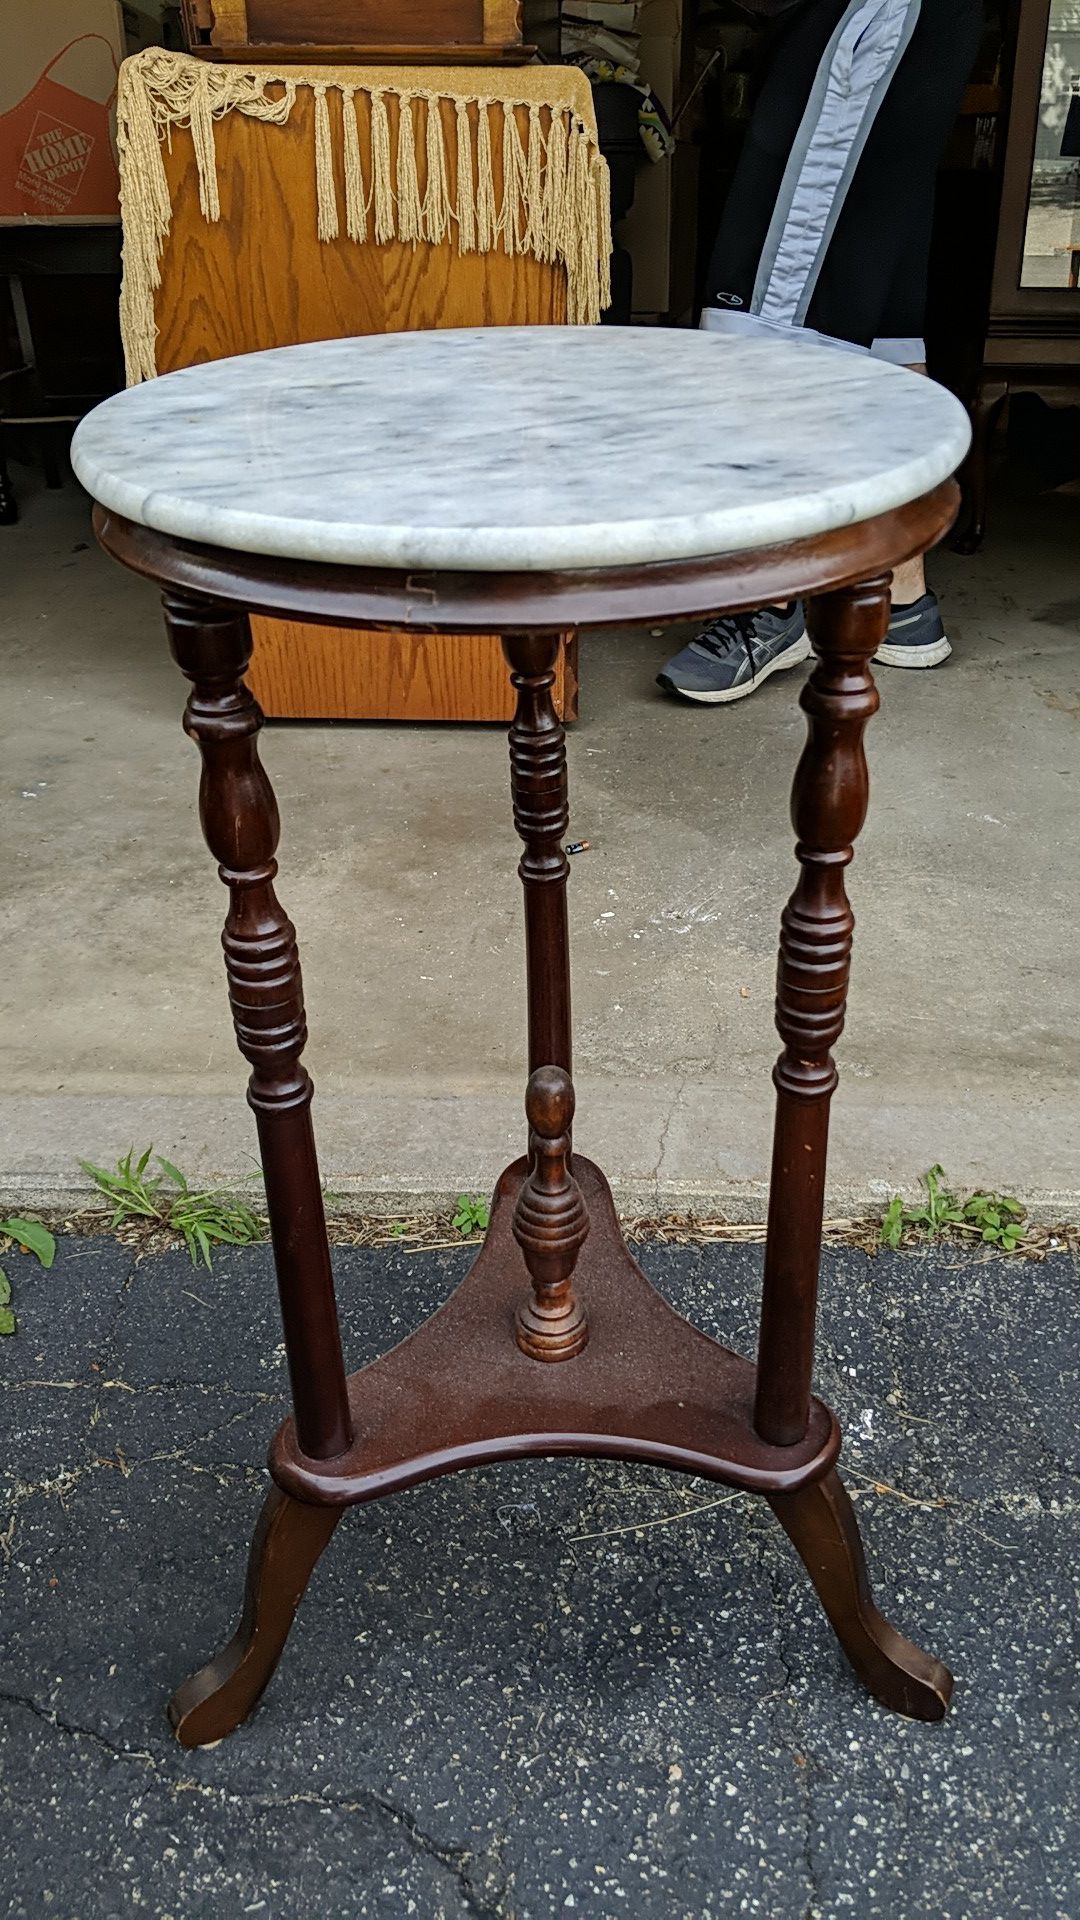 Champion marble top end table.